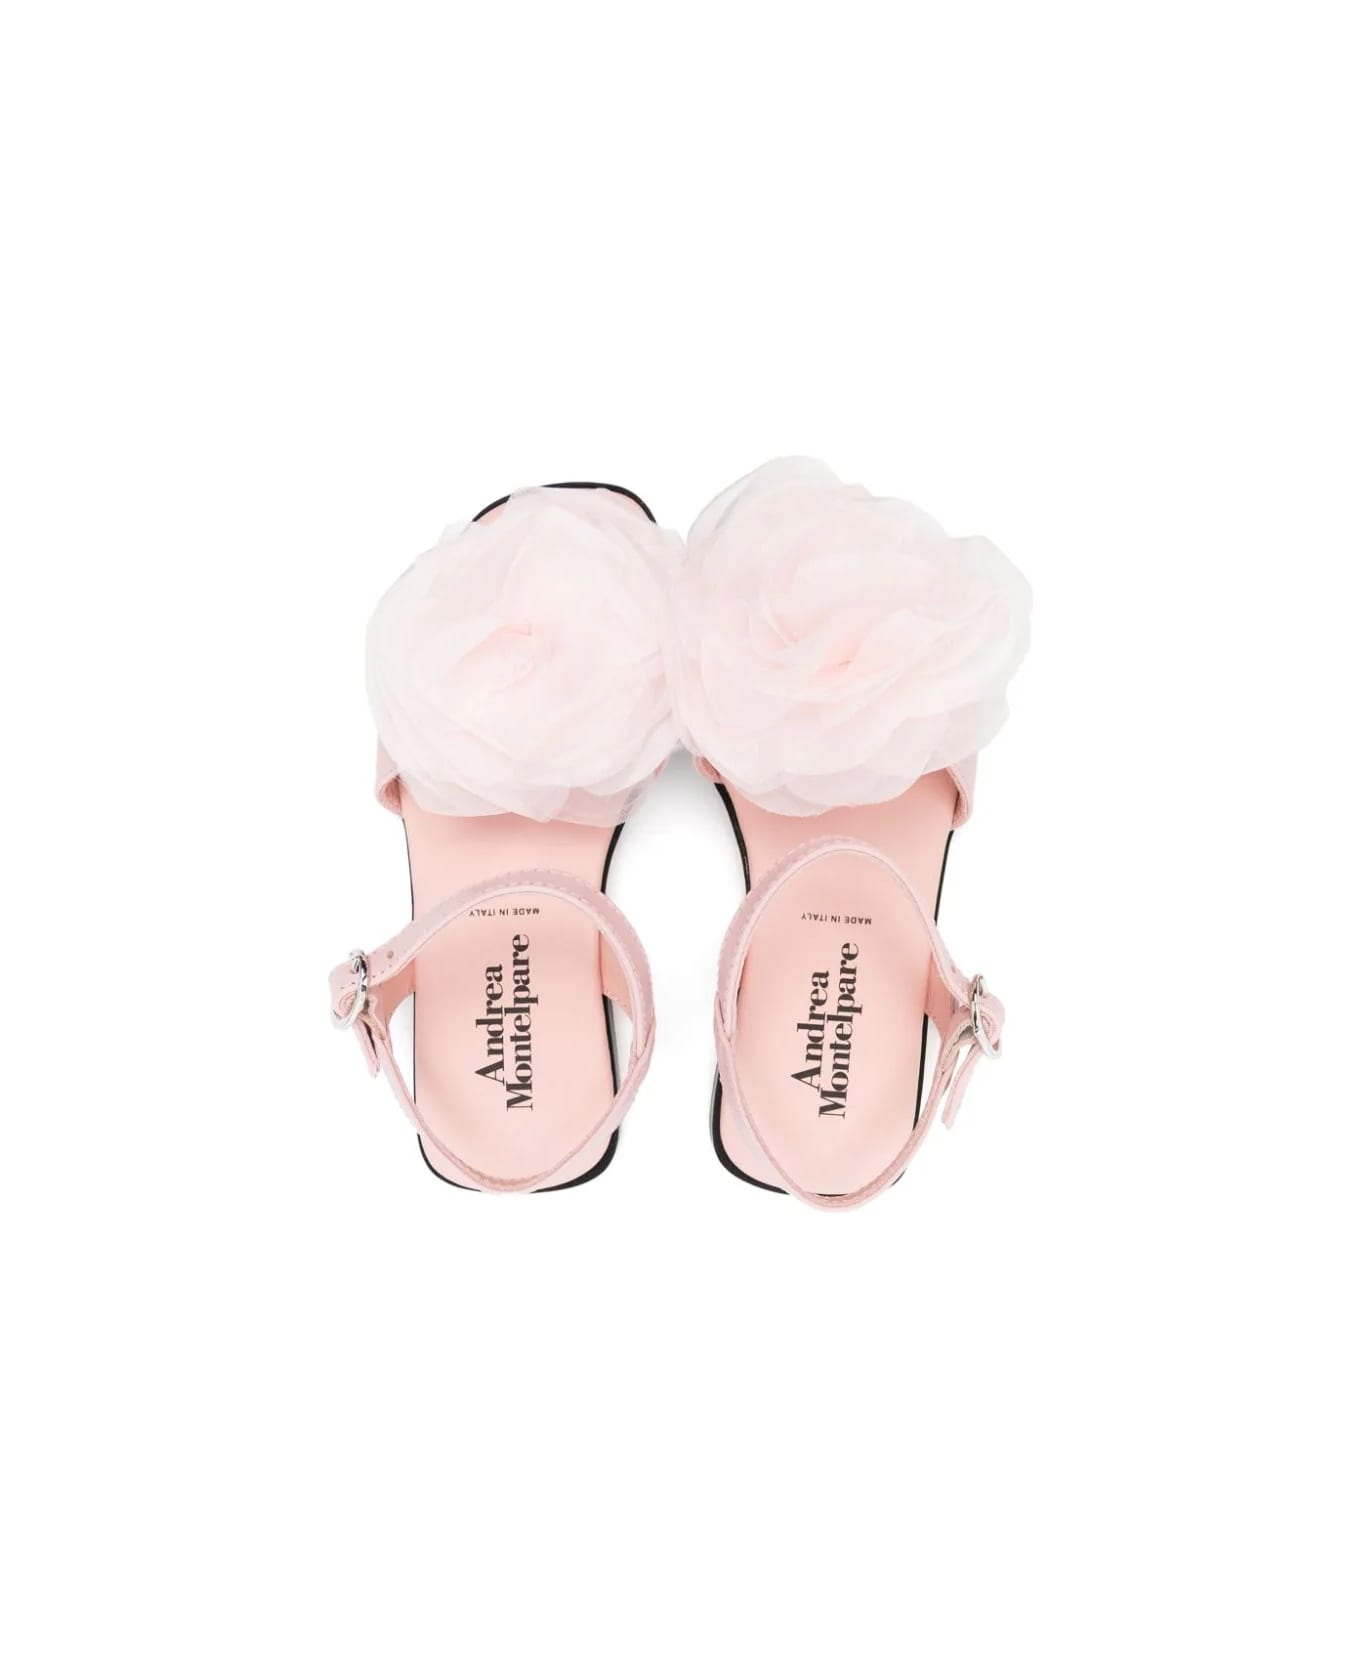 Andrea Montelpare Sandal With Applications - Pink シューズ